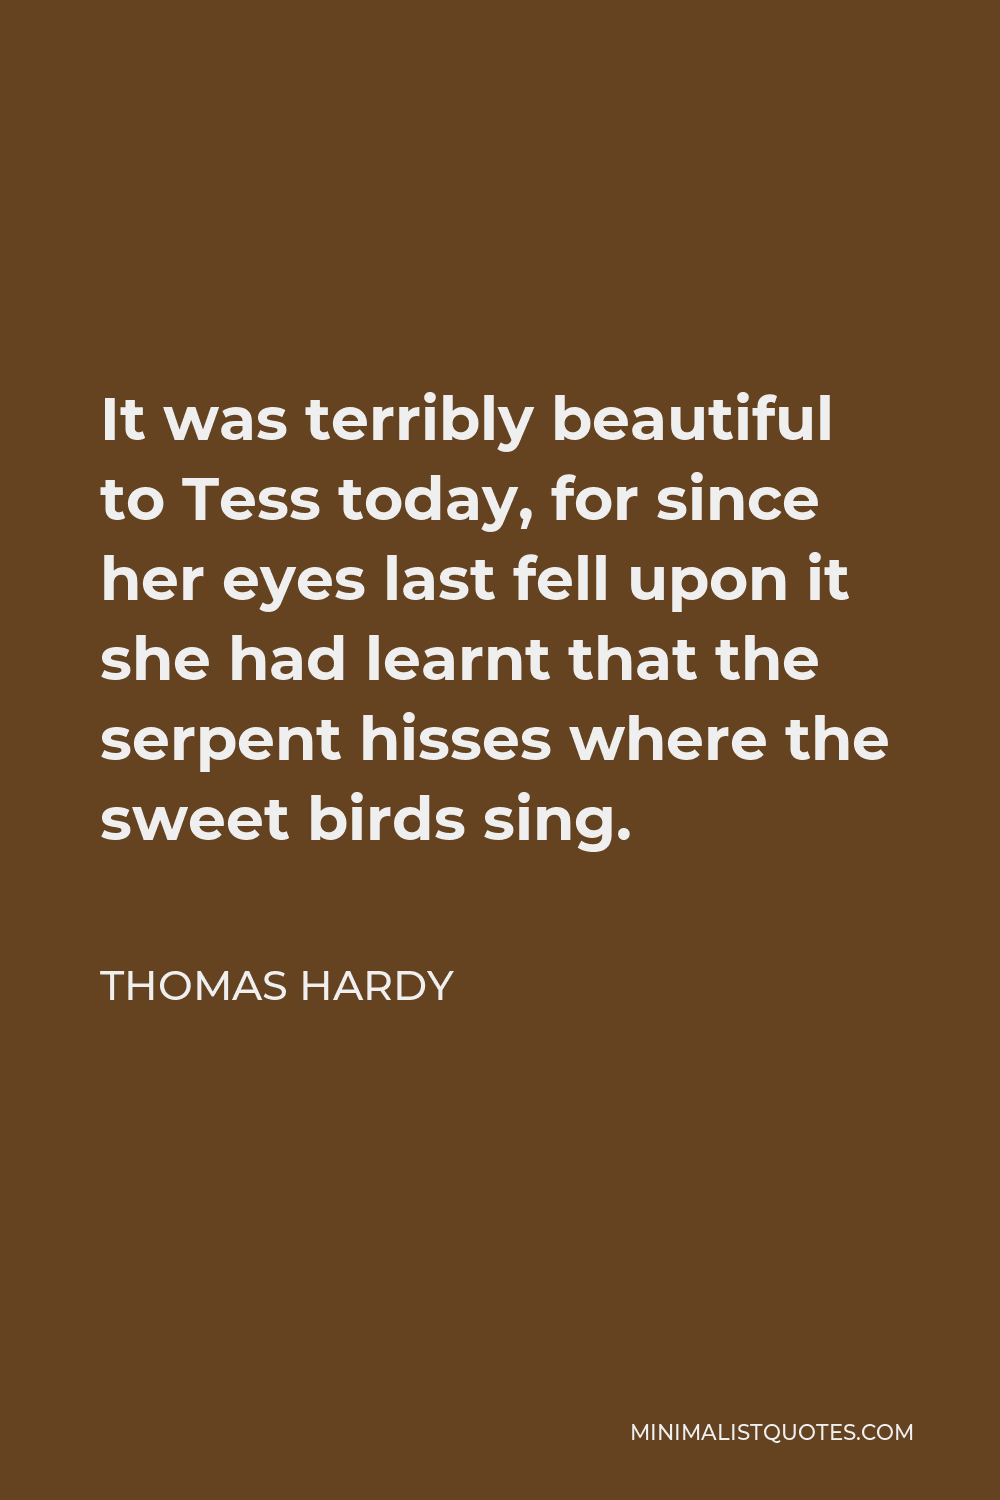 Thomas Hardy Quote - It was terribly beautiful to Tess today, for since her eyes last fell upon it she had learnt that the serpent hisses where the sweet birds sing.